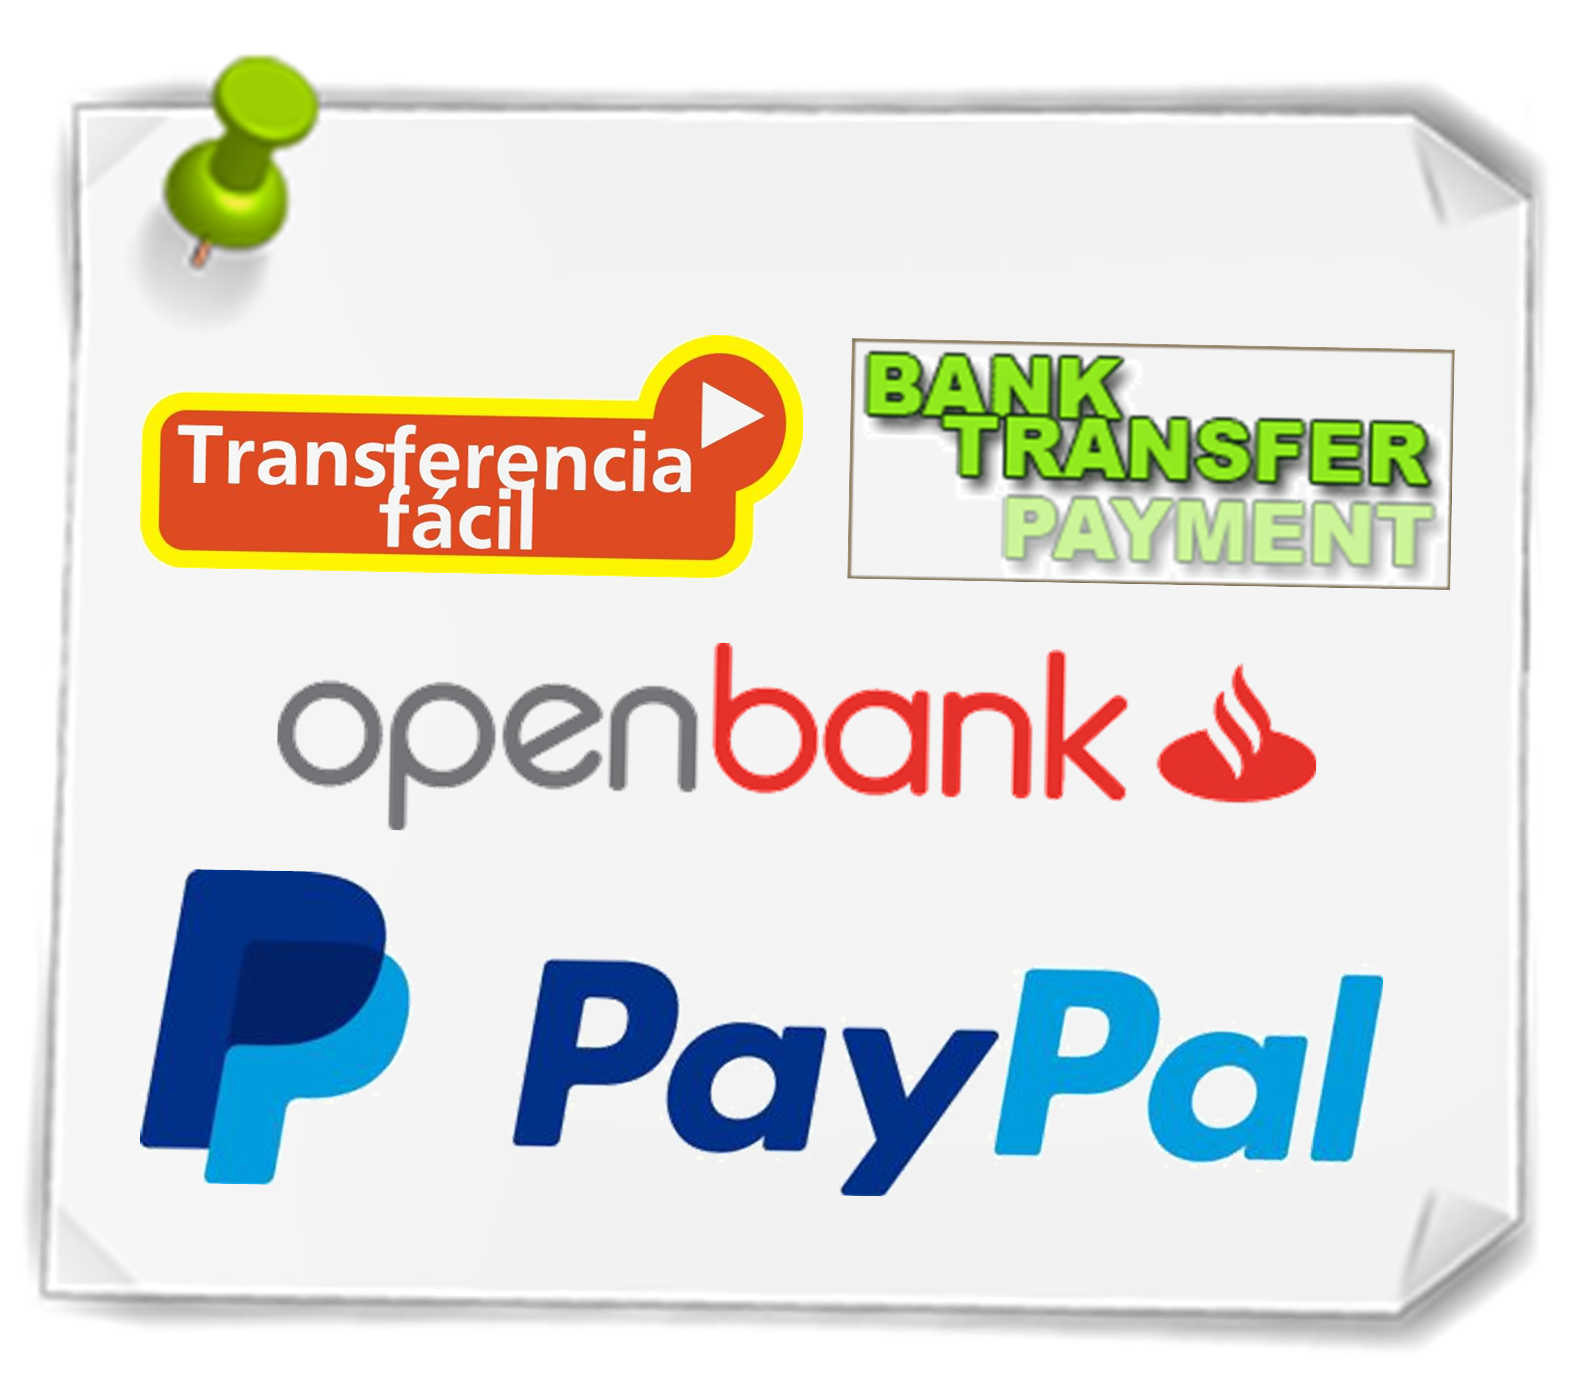 Paypal and Bank Transfer accepted.